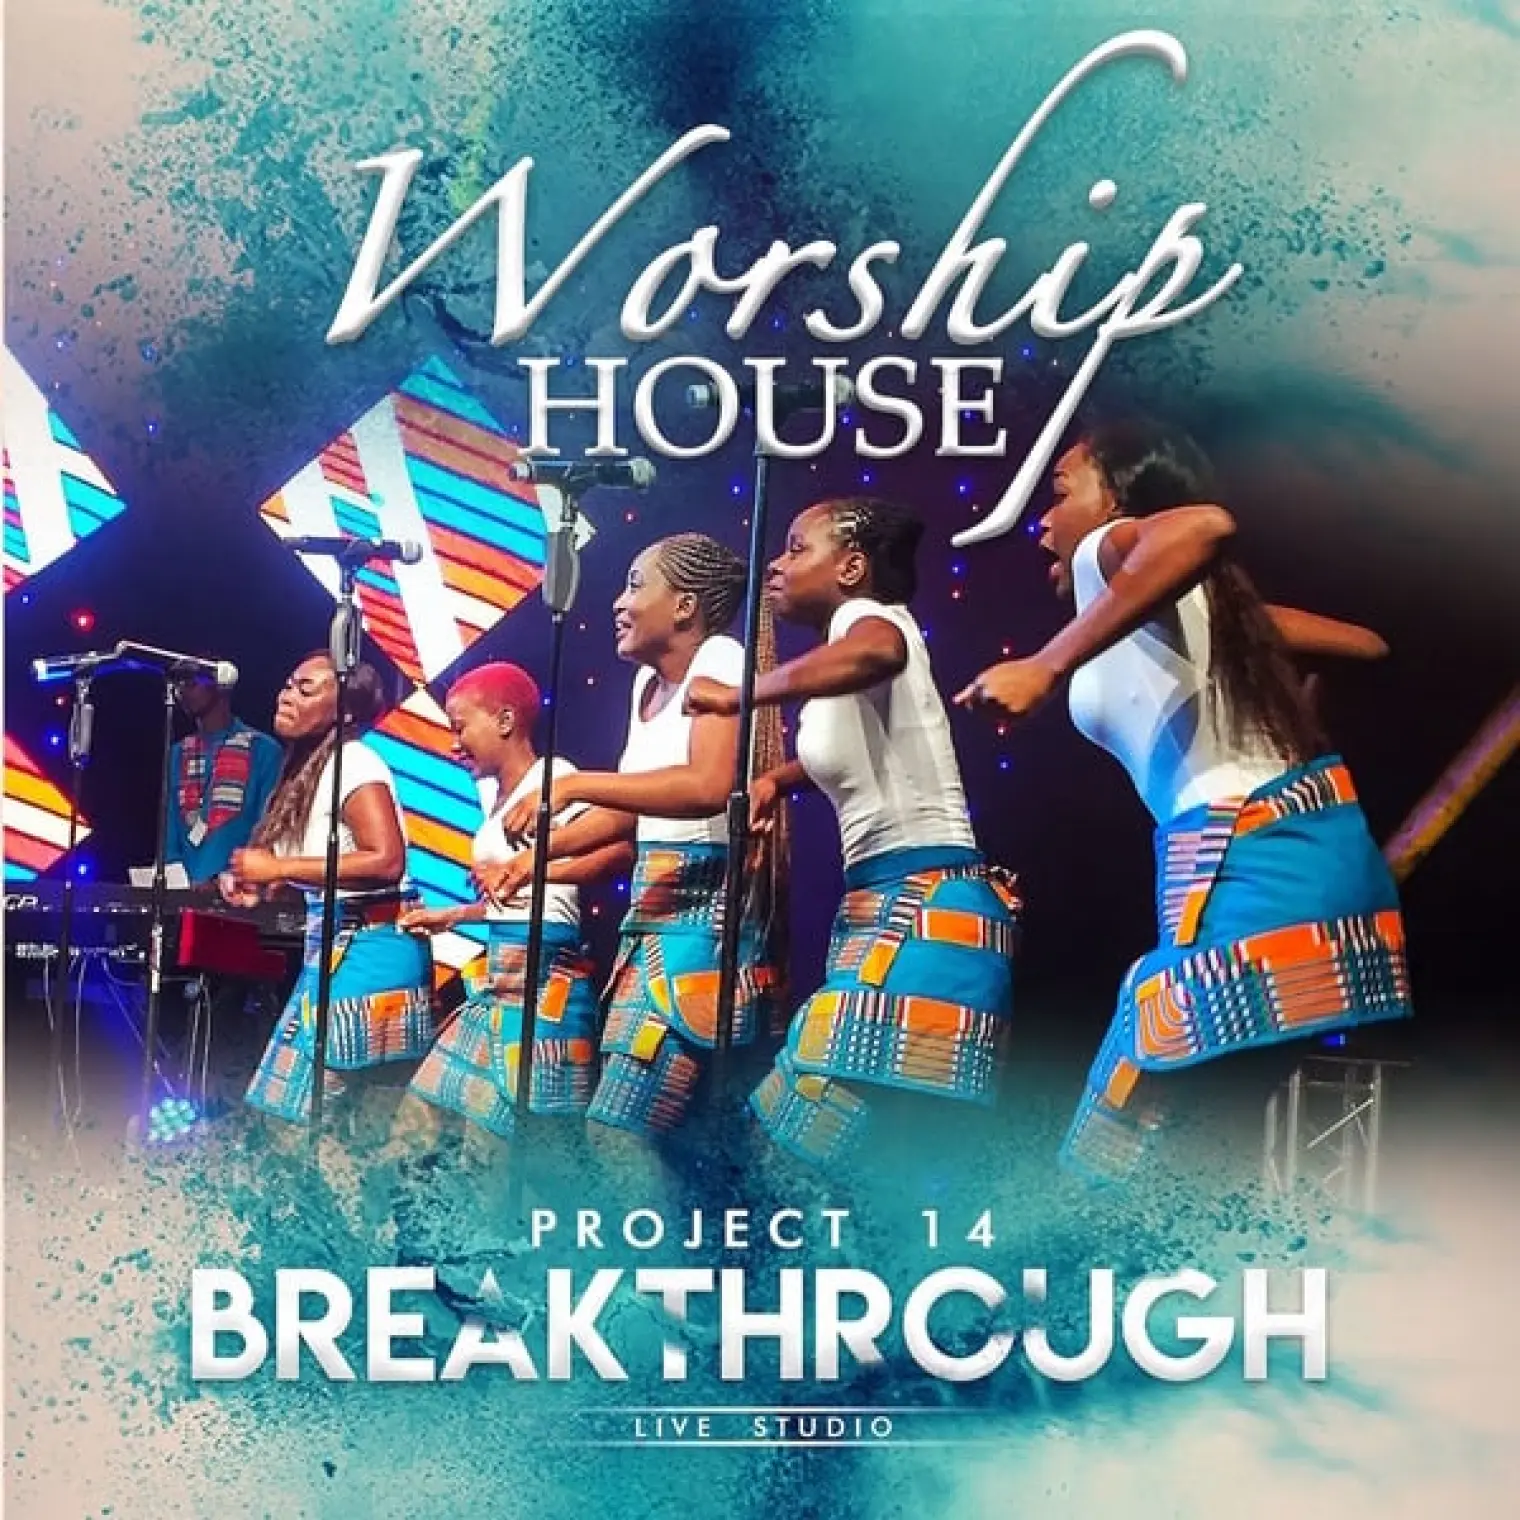 Project 14 Breakthrough -  Worship House 